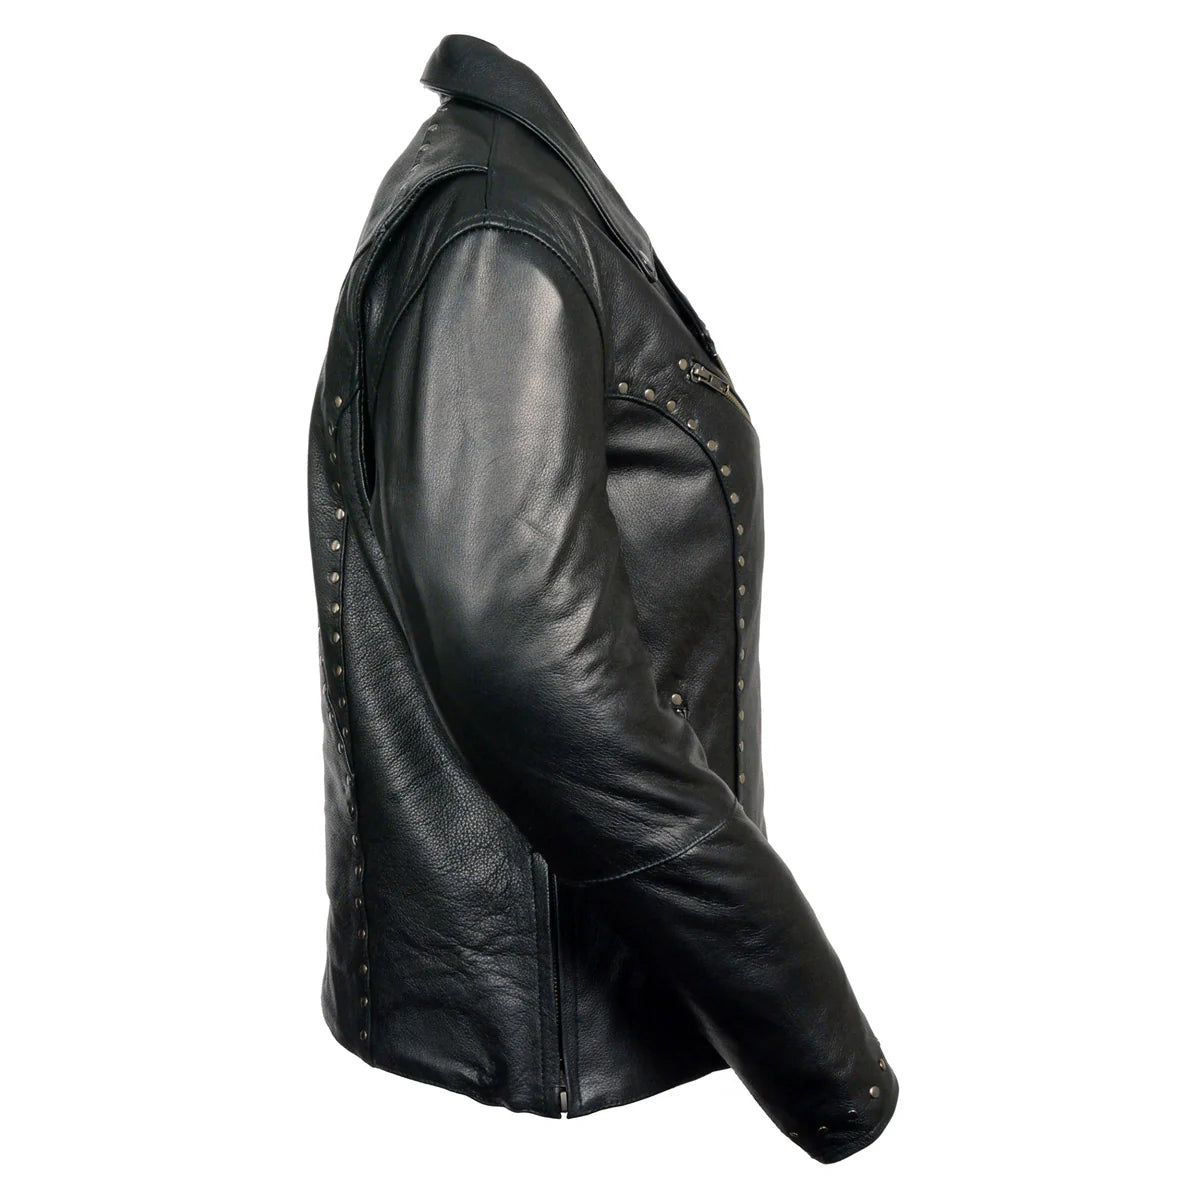 Women's Classic Riveted Motorcycle Black Leather Jacket